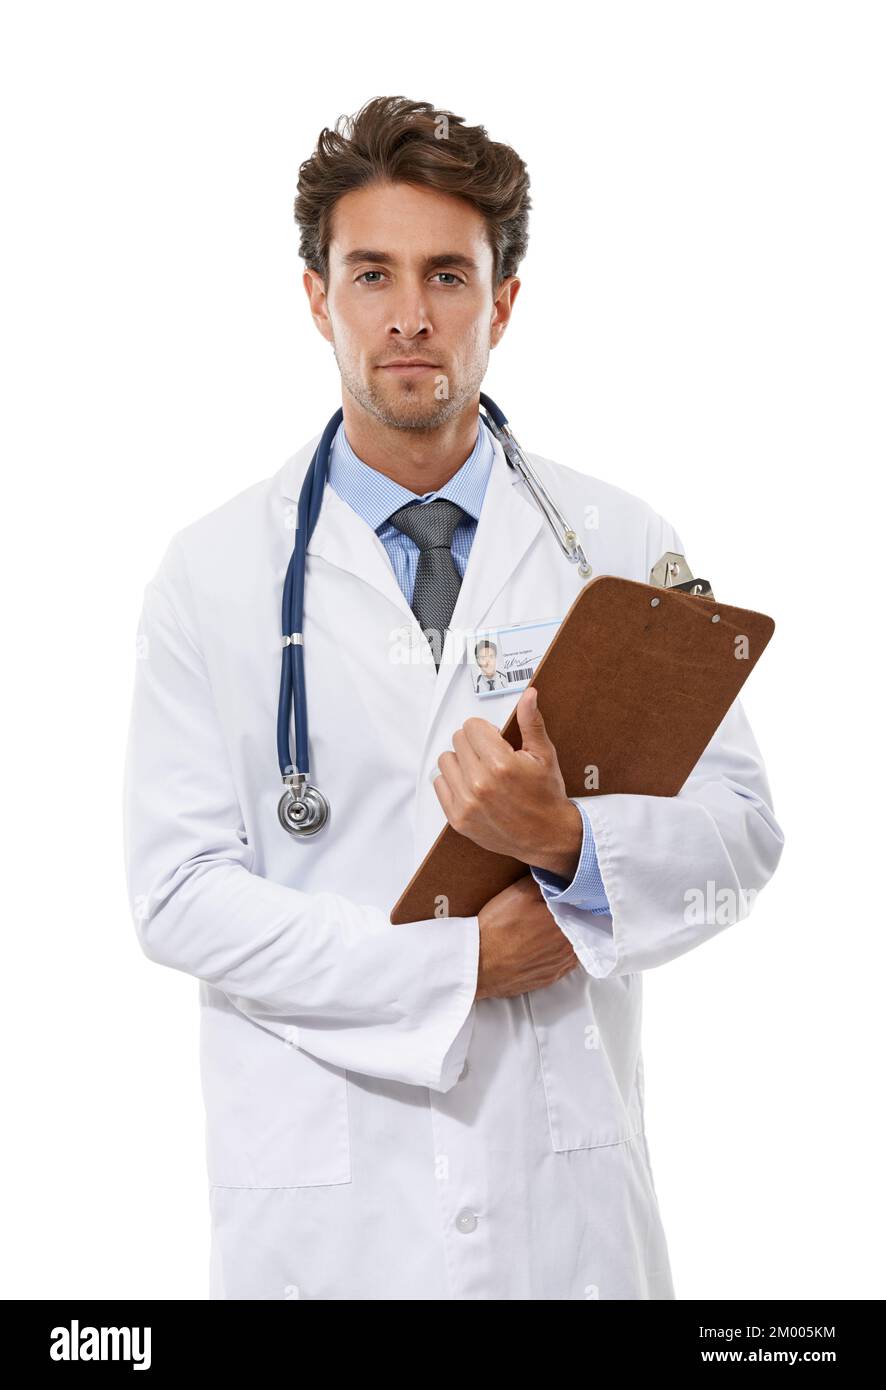 Serious about healthcare. Studio portrait of a serious-looking young doctor holding a clipboard. Stock Photo